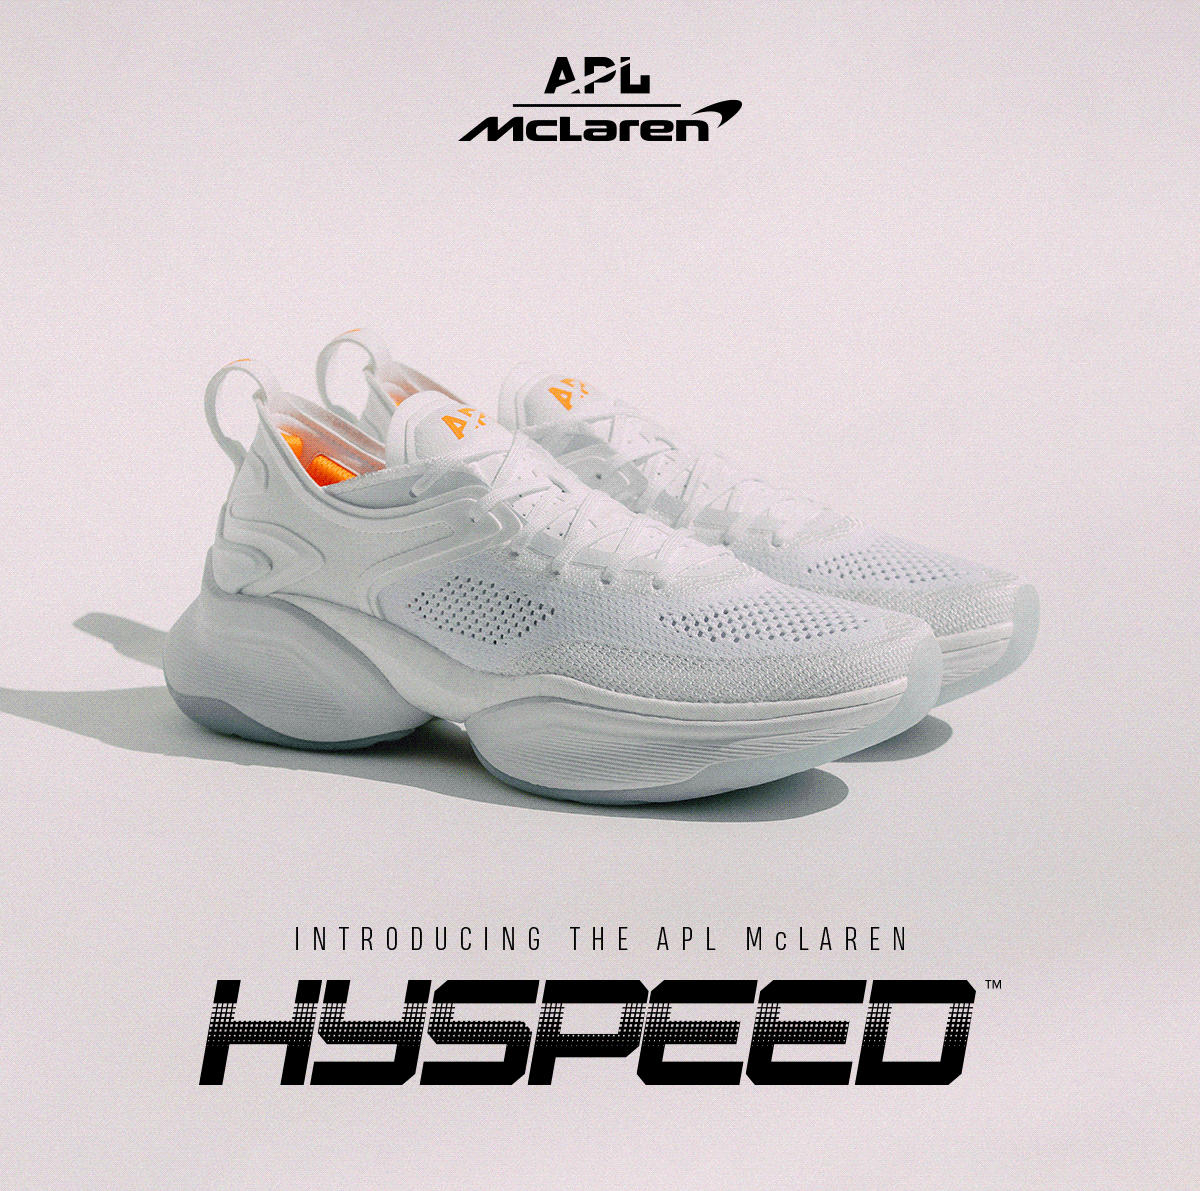 apl hyspeed shoes